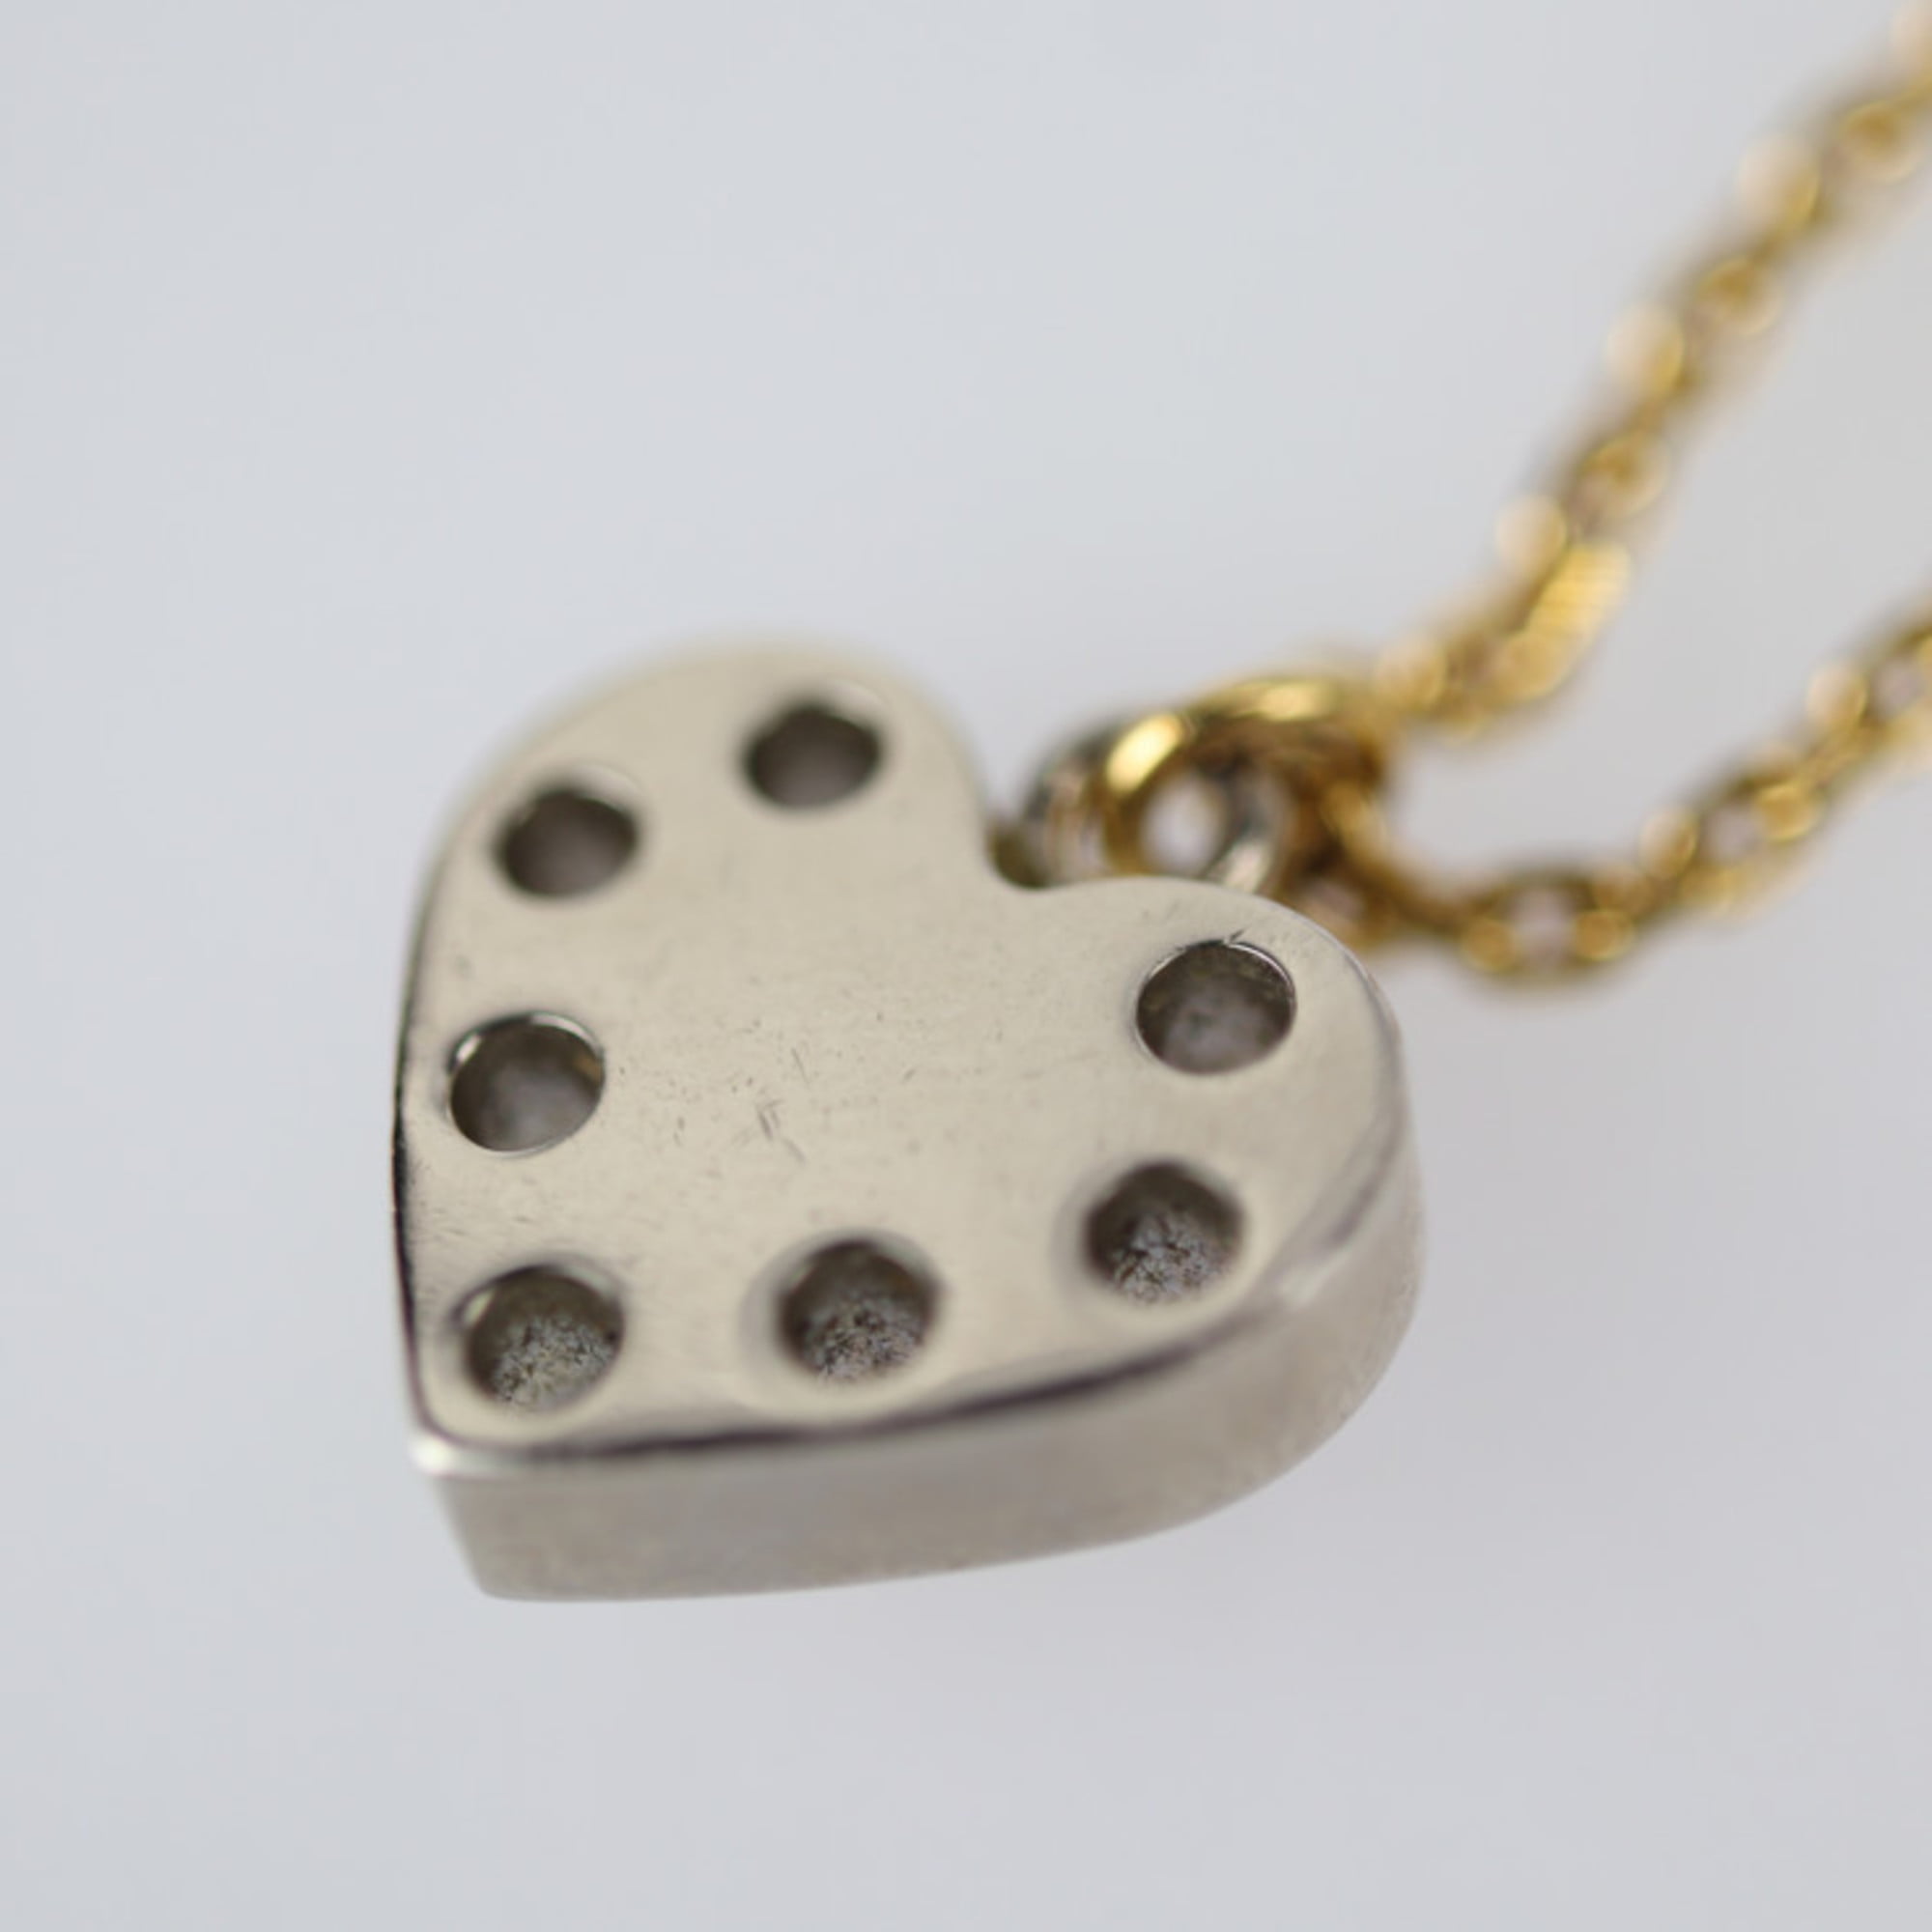 LOUIS VUITTON LOUIS VUITTON Pendentif Spiky Valentine Heart Necklace metal  Gold Silver Used M67028｜Product Code：2107400203920｜BRAND OFF Online Store